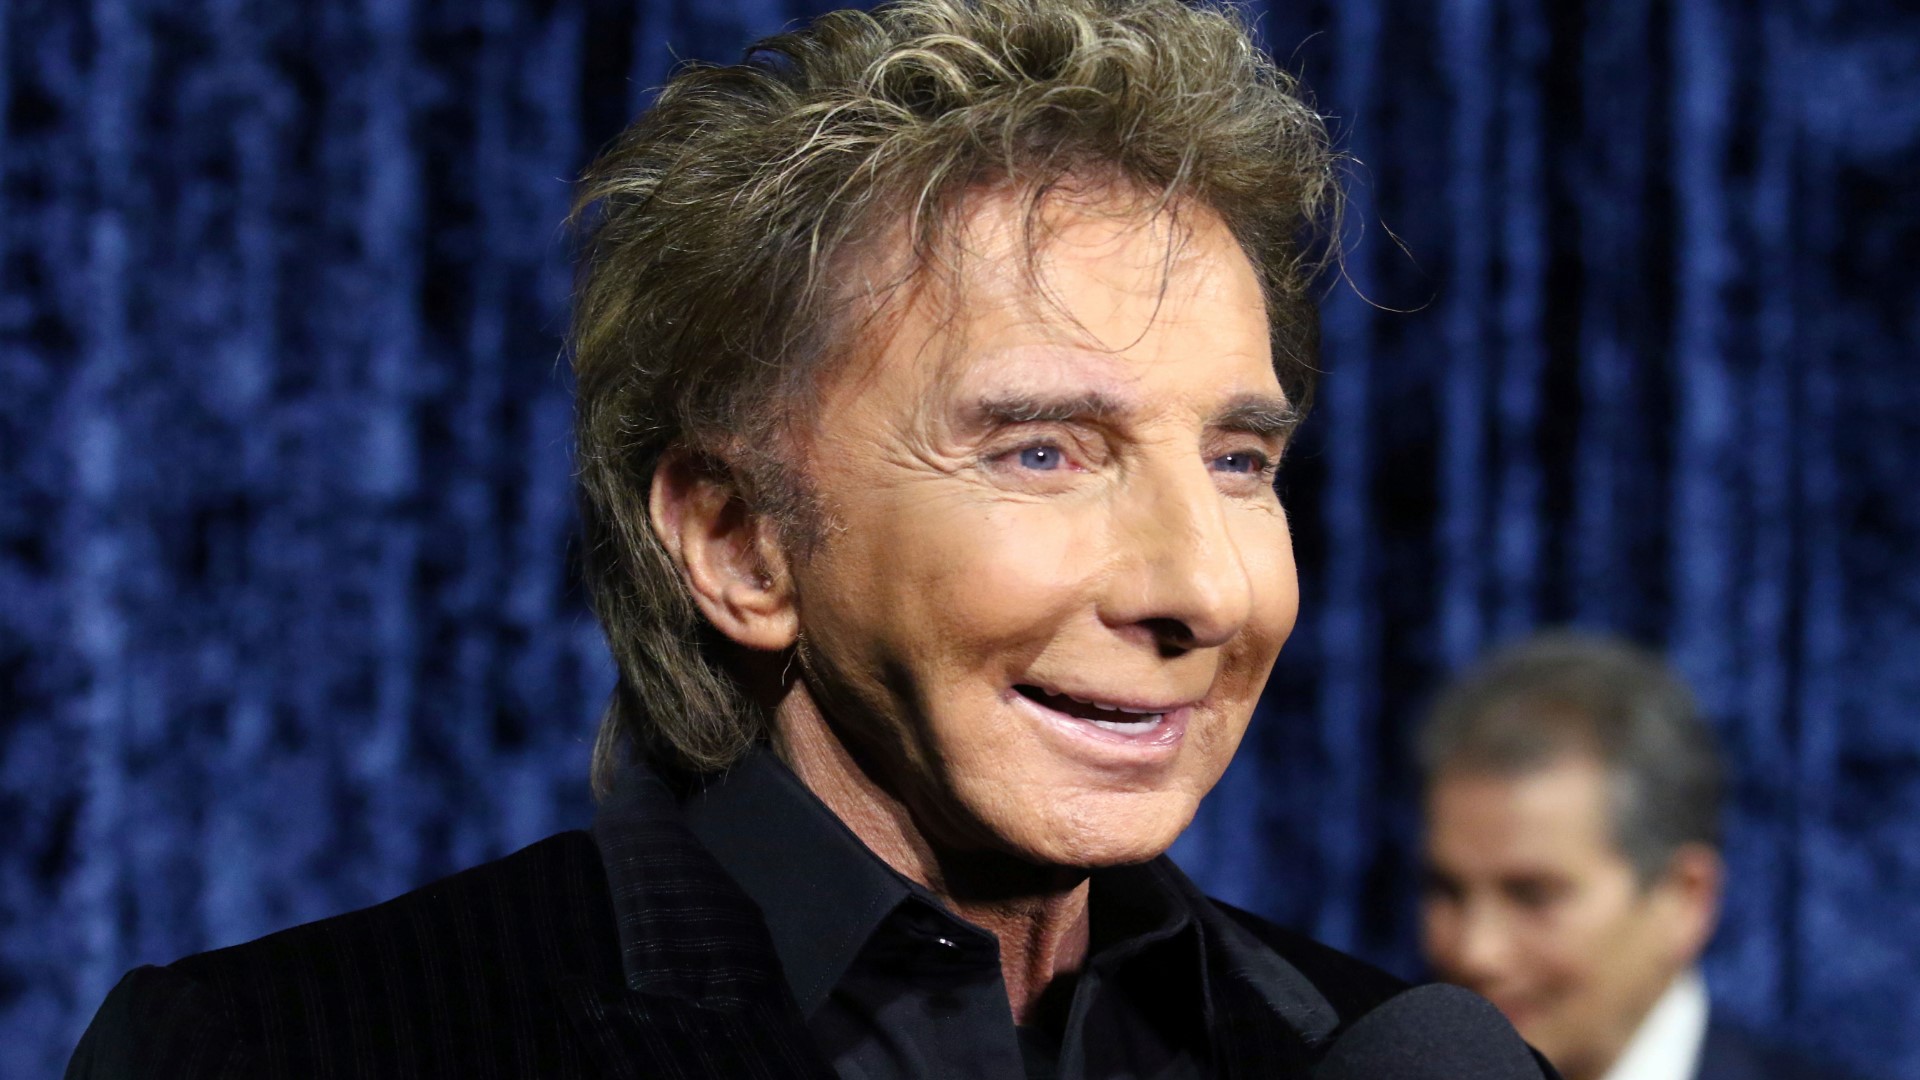 Barry Manilow to perform in January at Amalie Arena